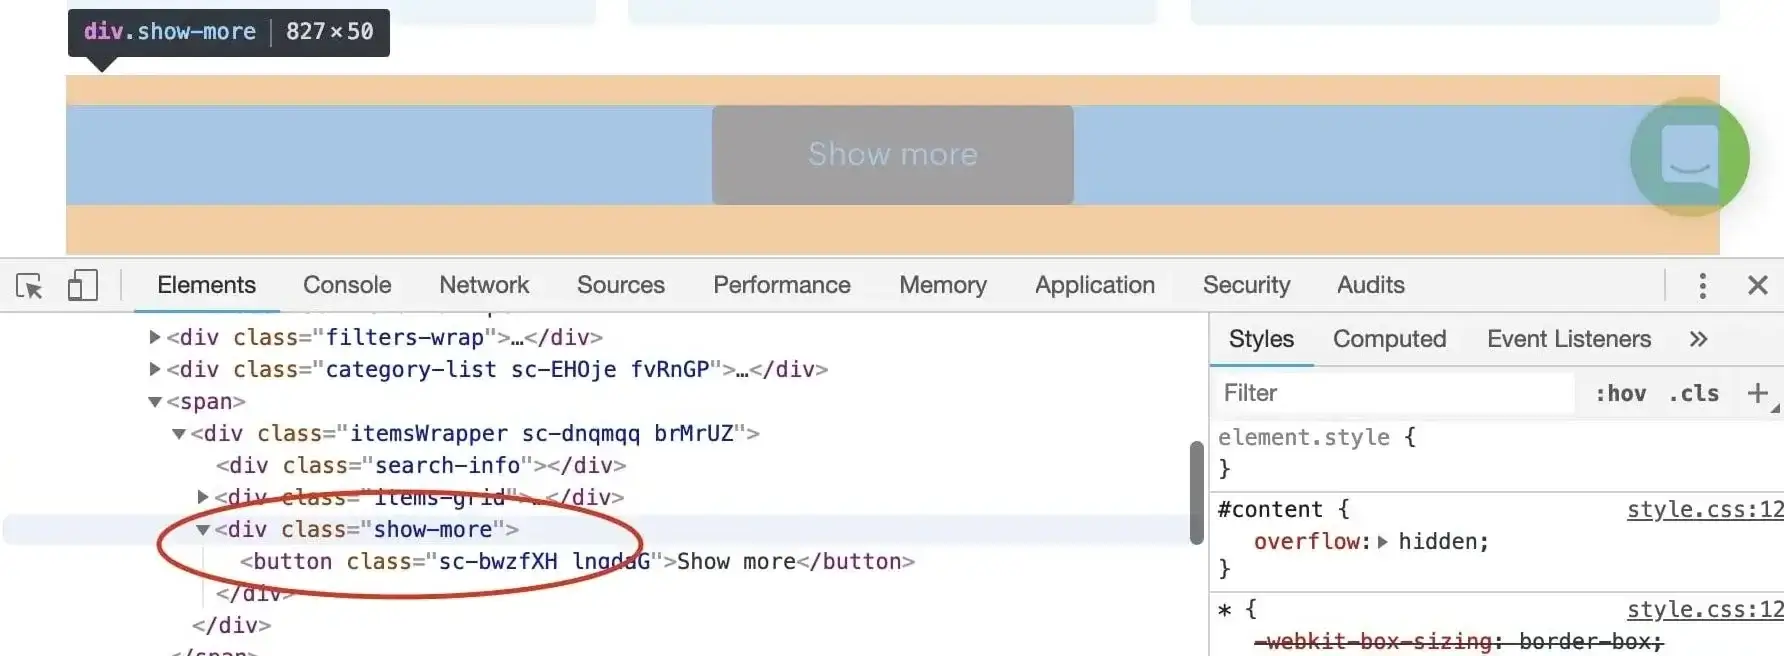 Finding show more button in DevTools